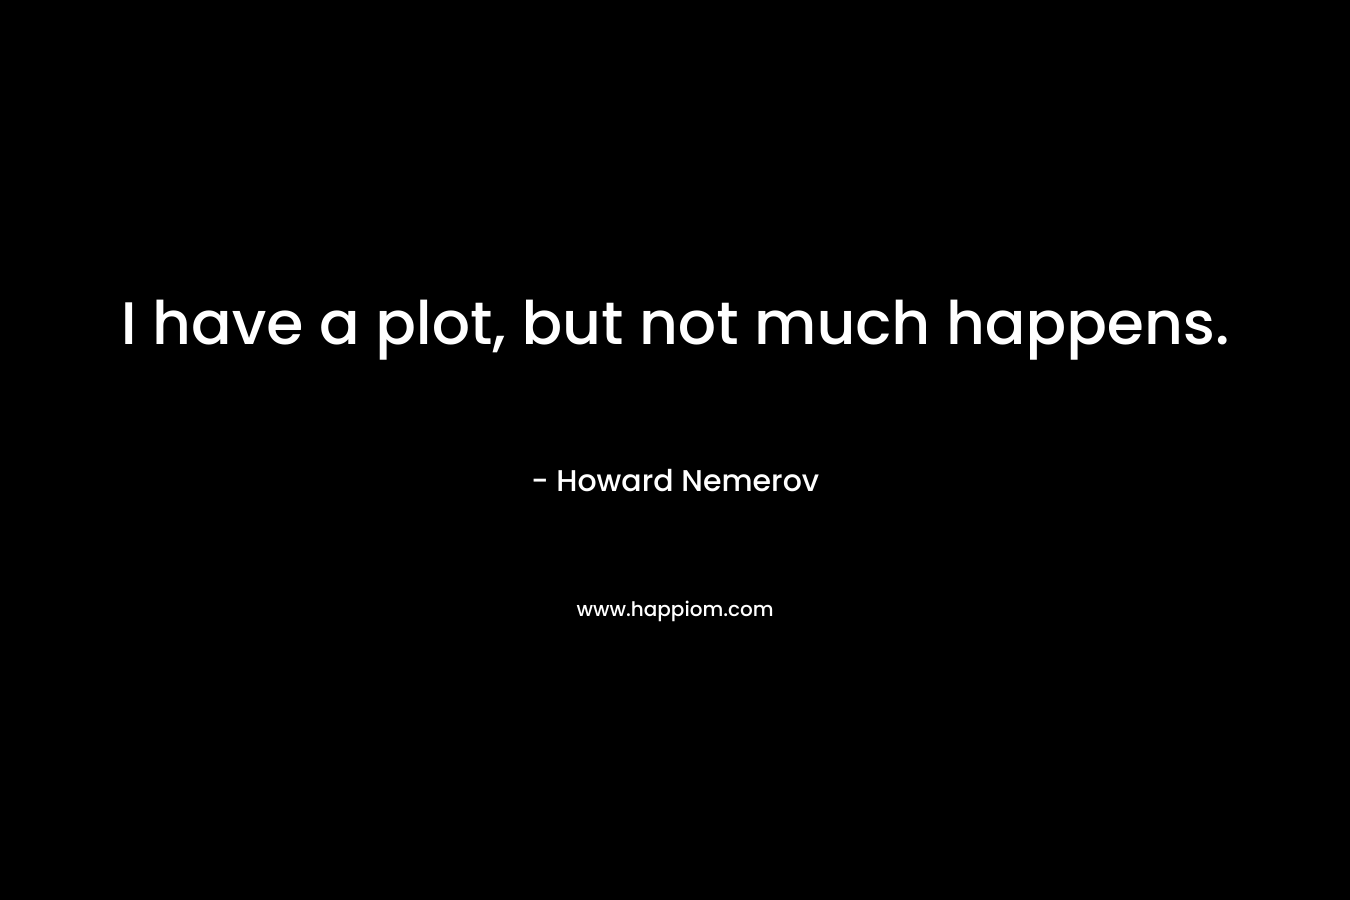 I have a plot, but not much happens. – Howard Nemerov